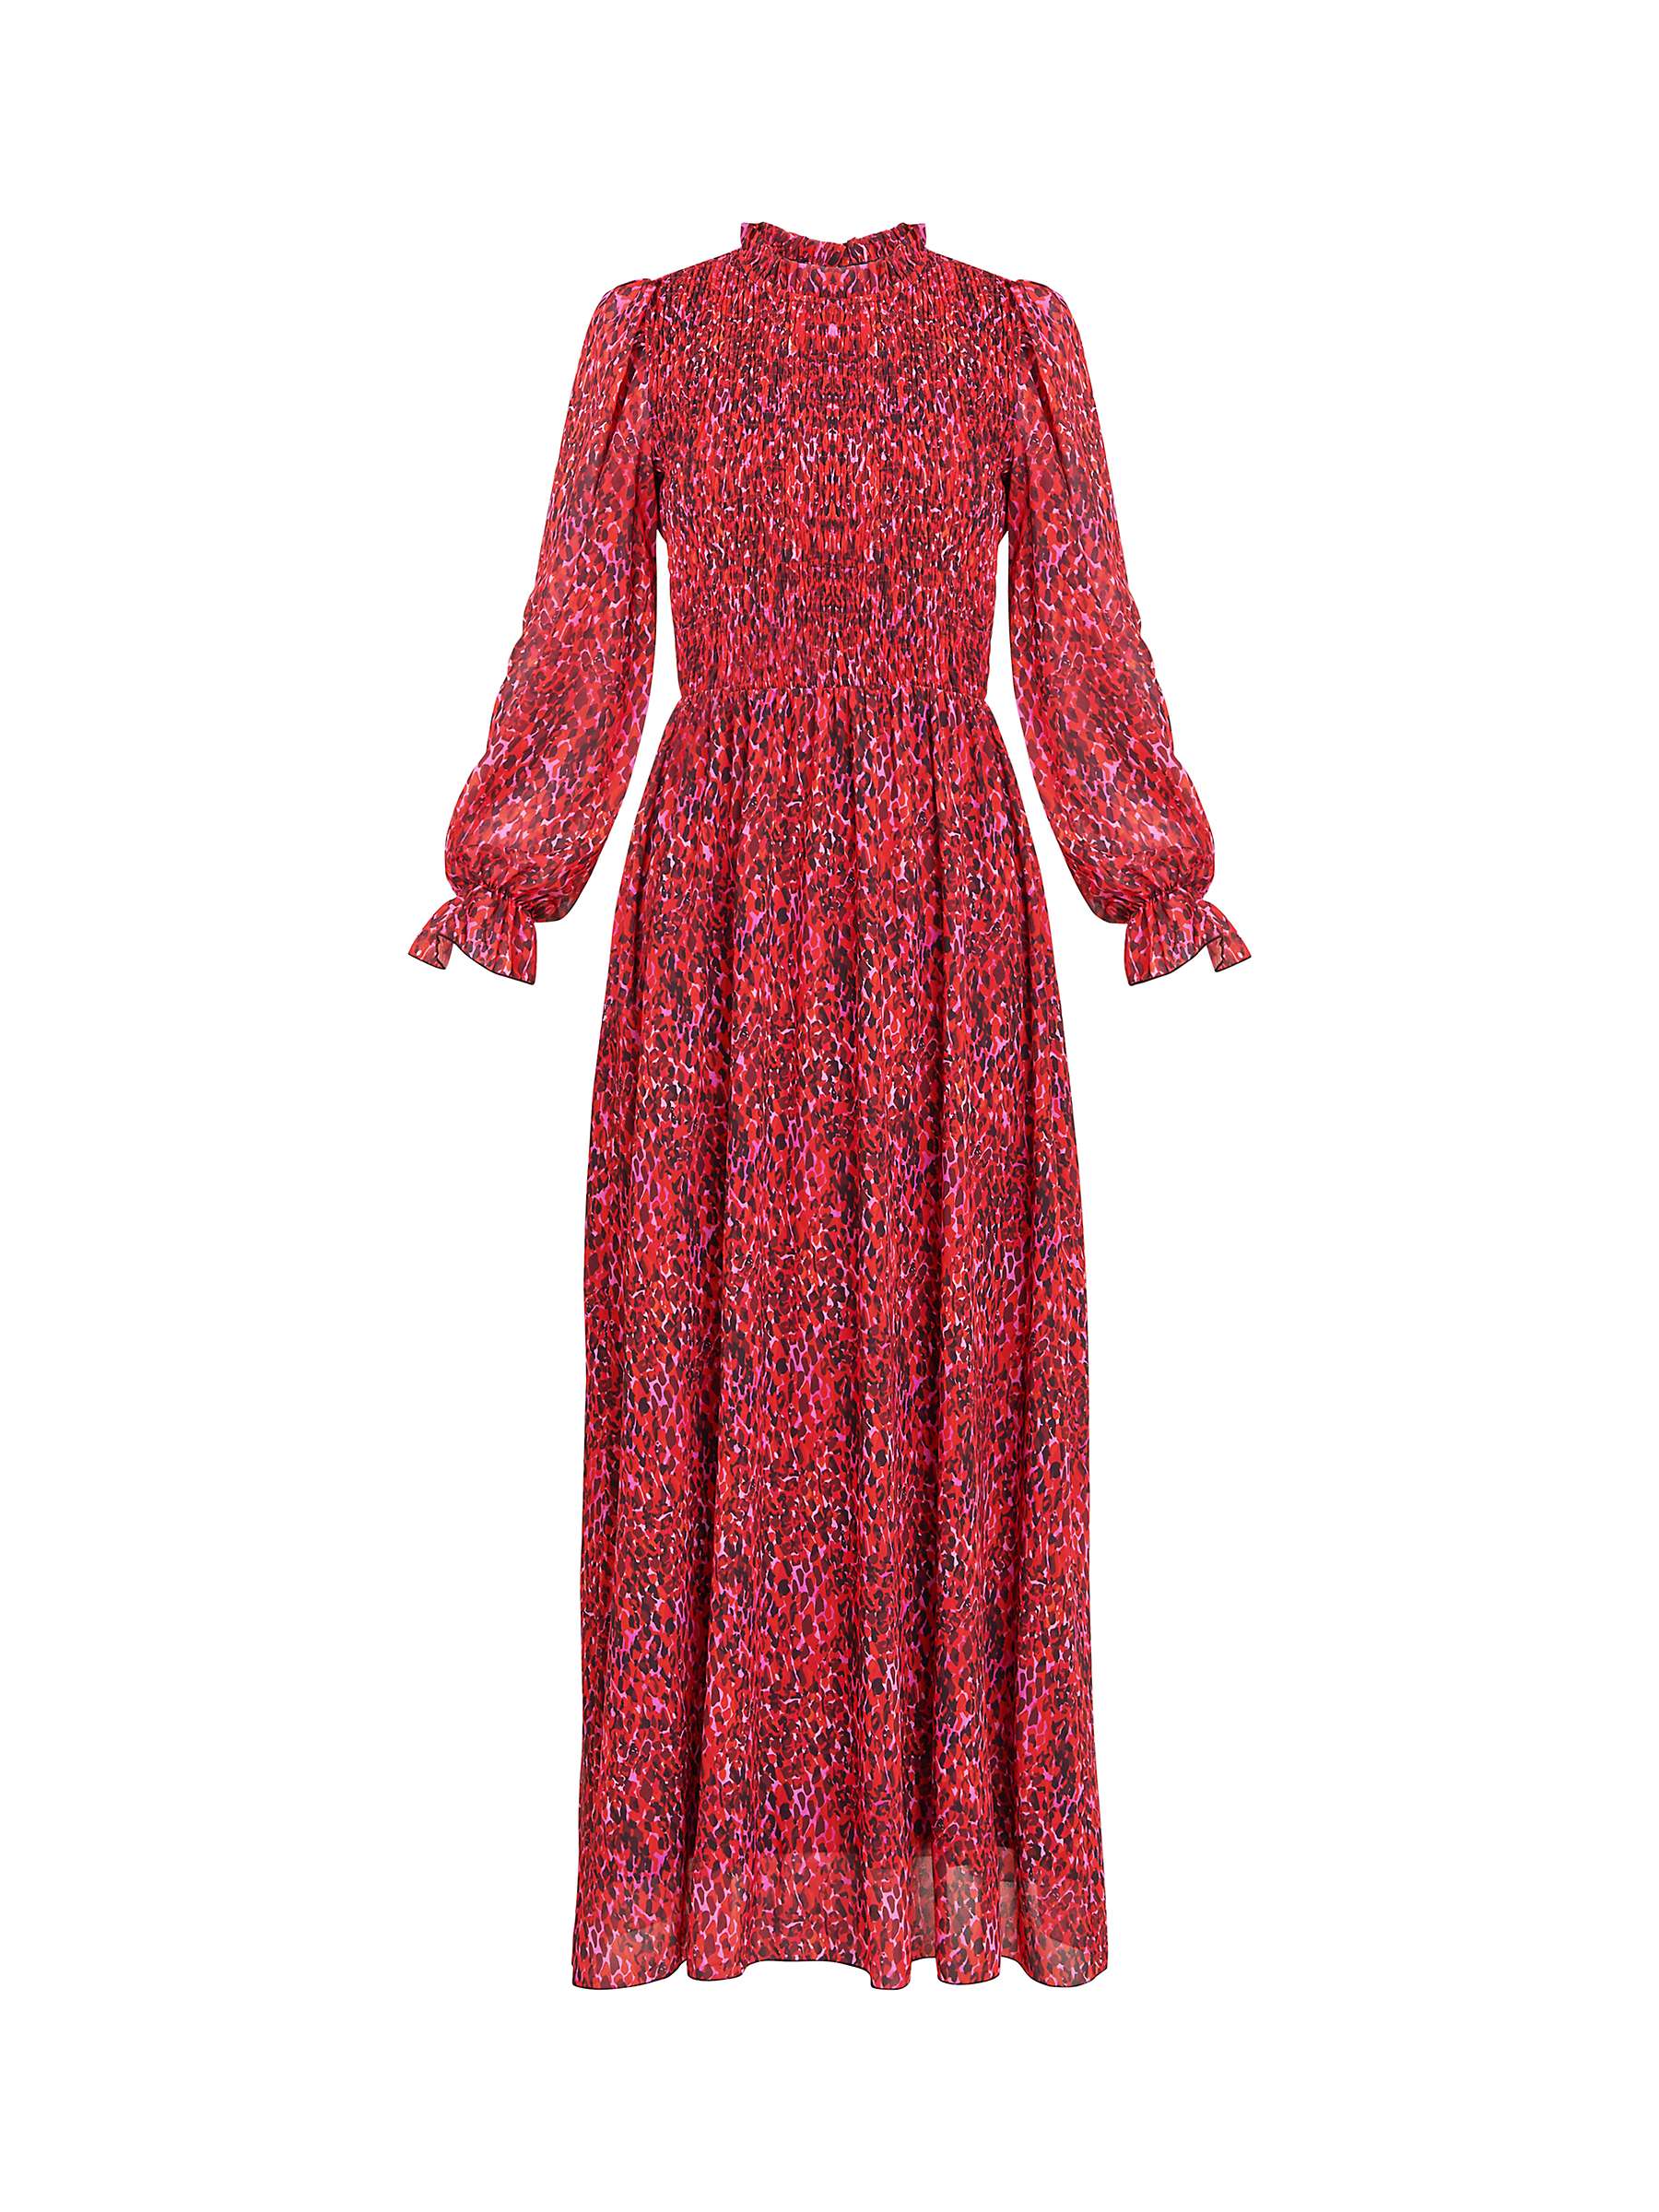 Buy Gina Bacconi Thea Abstract Print Maxi Dress, Red Online at johnlewis.com